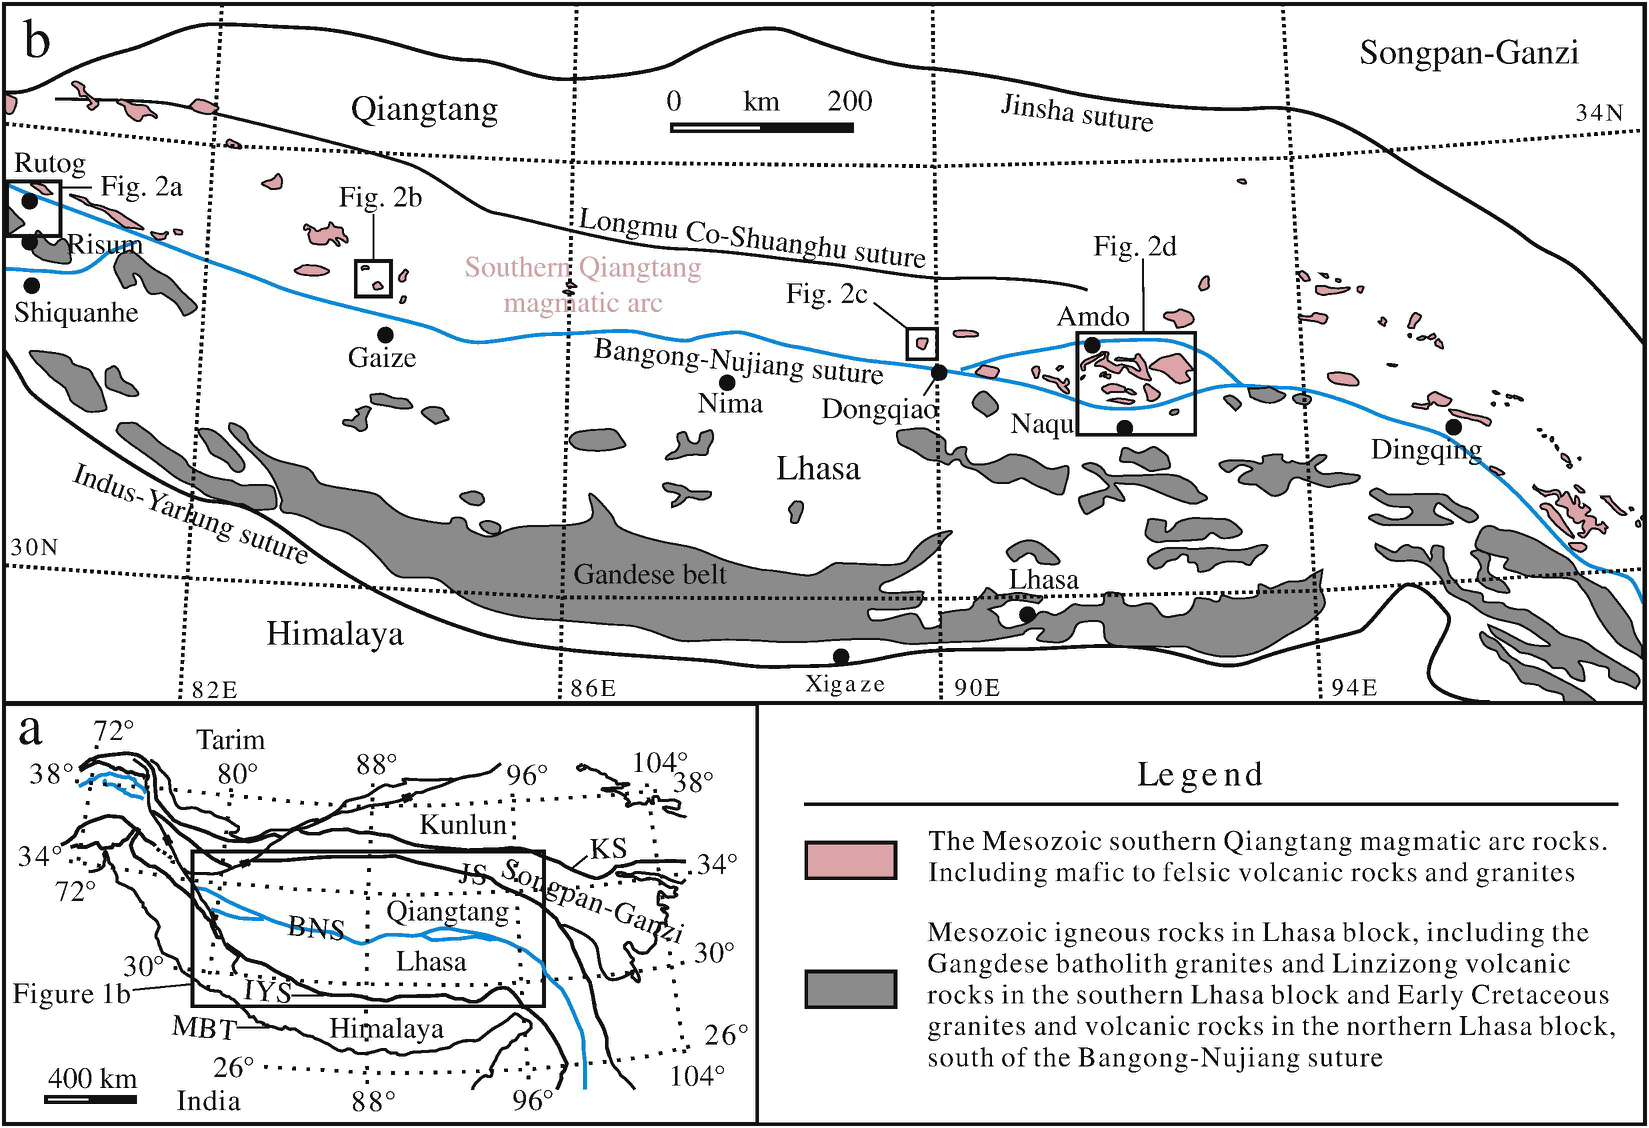 The Zircon Hf isotope of tranites in South Qiangtang of the Tibetan Plateau (2014)